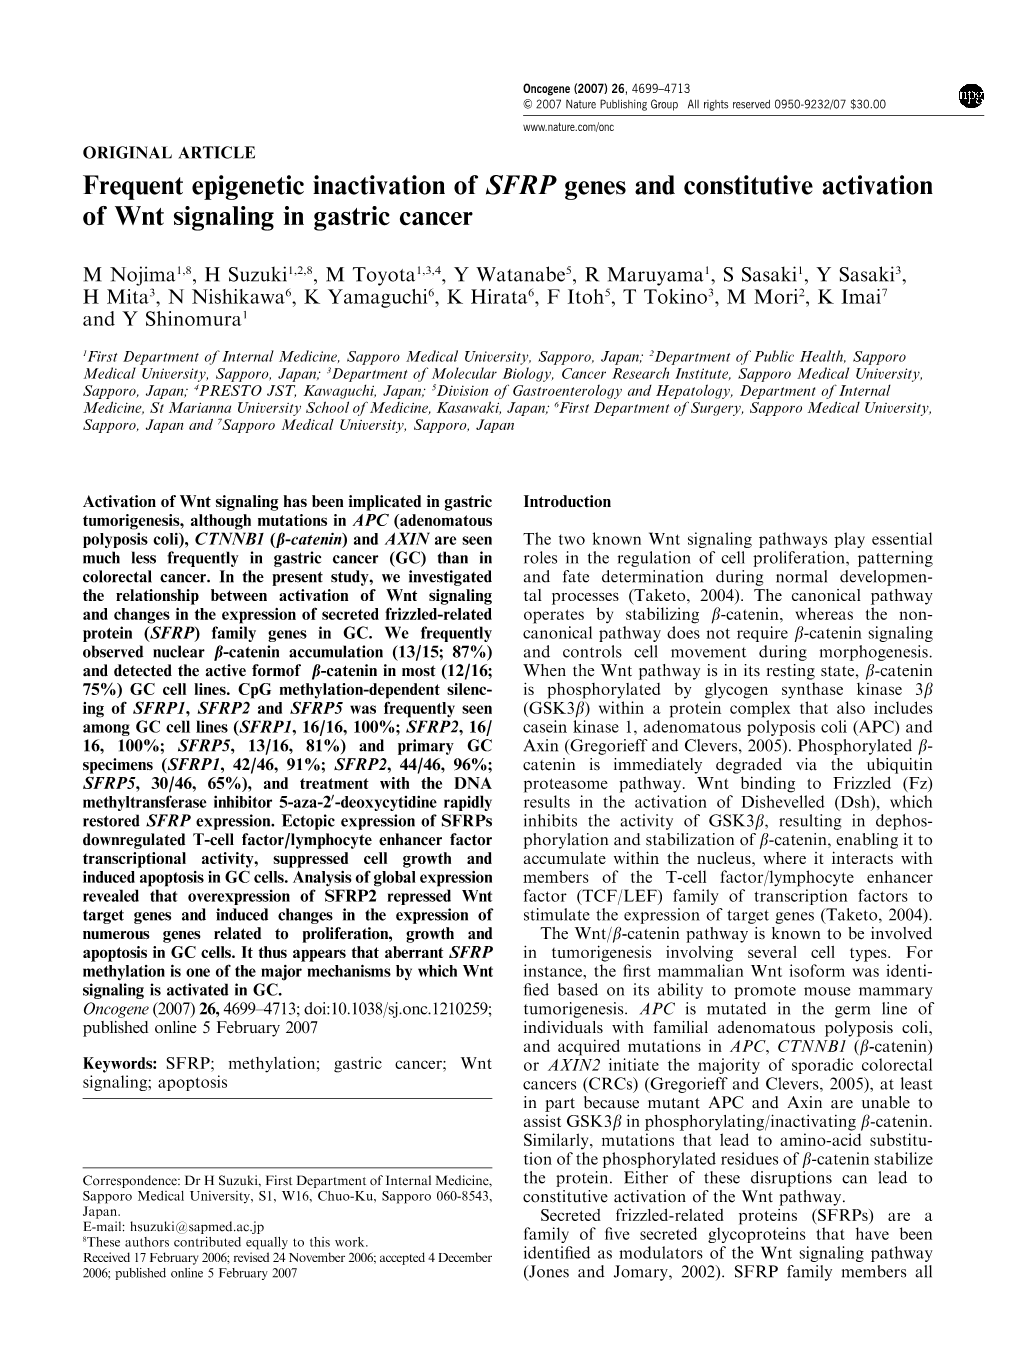 Frequent Epigenetic Inactivation of SFRP Genes and Constitutive Activation of Wnt Signaling in Gastric Cancer